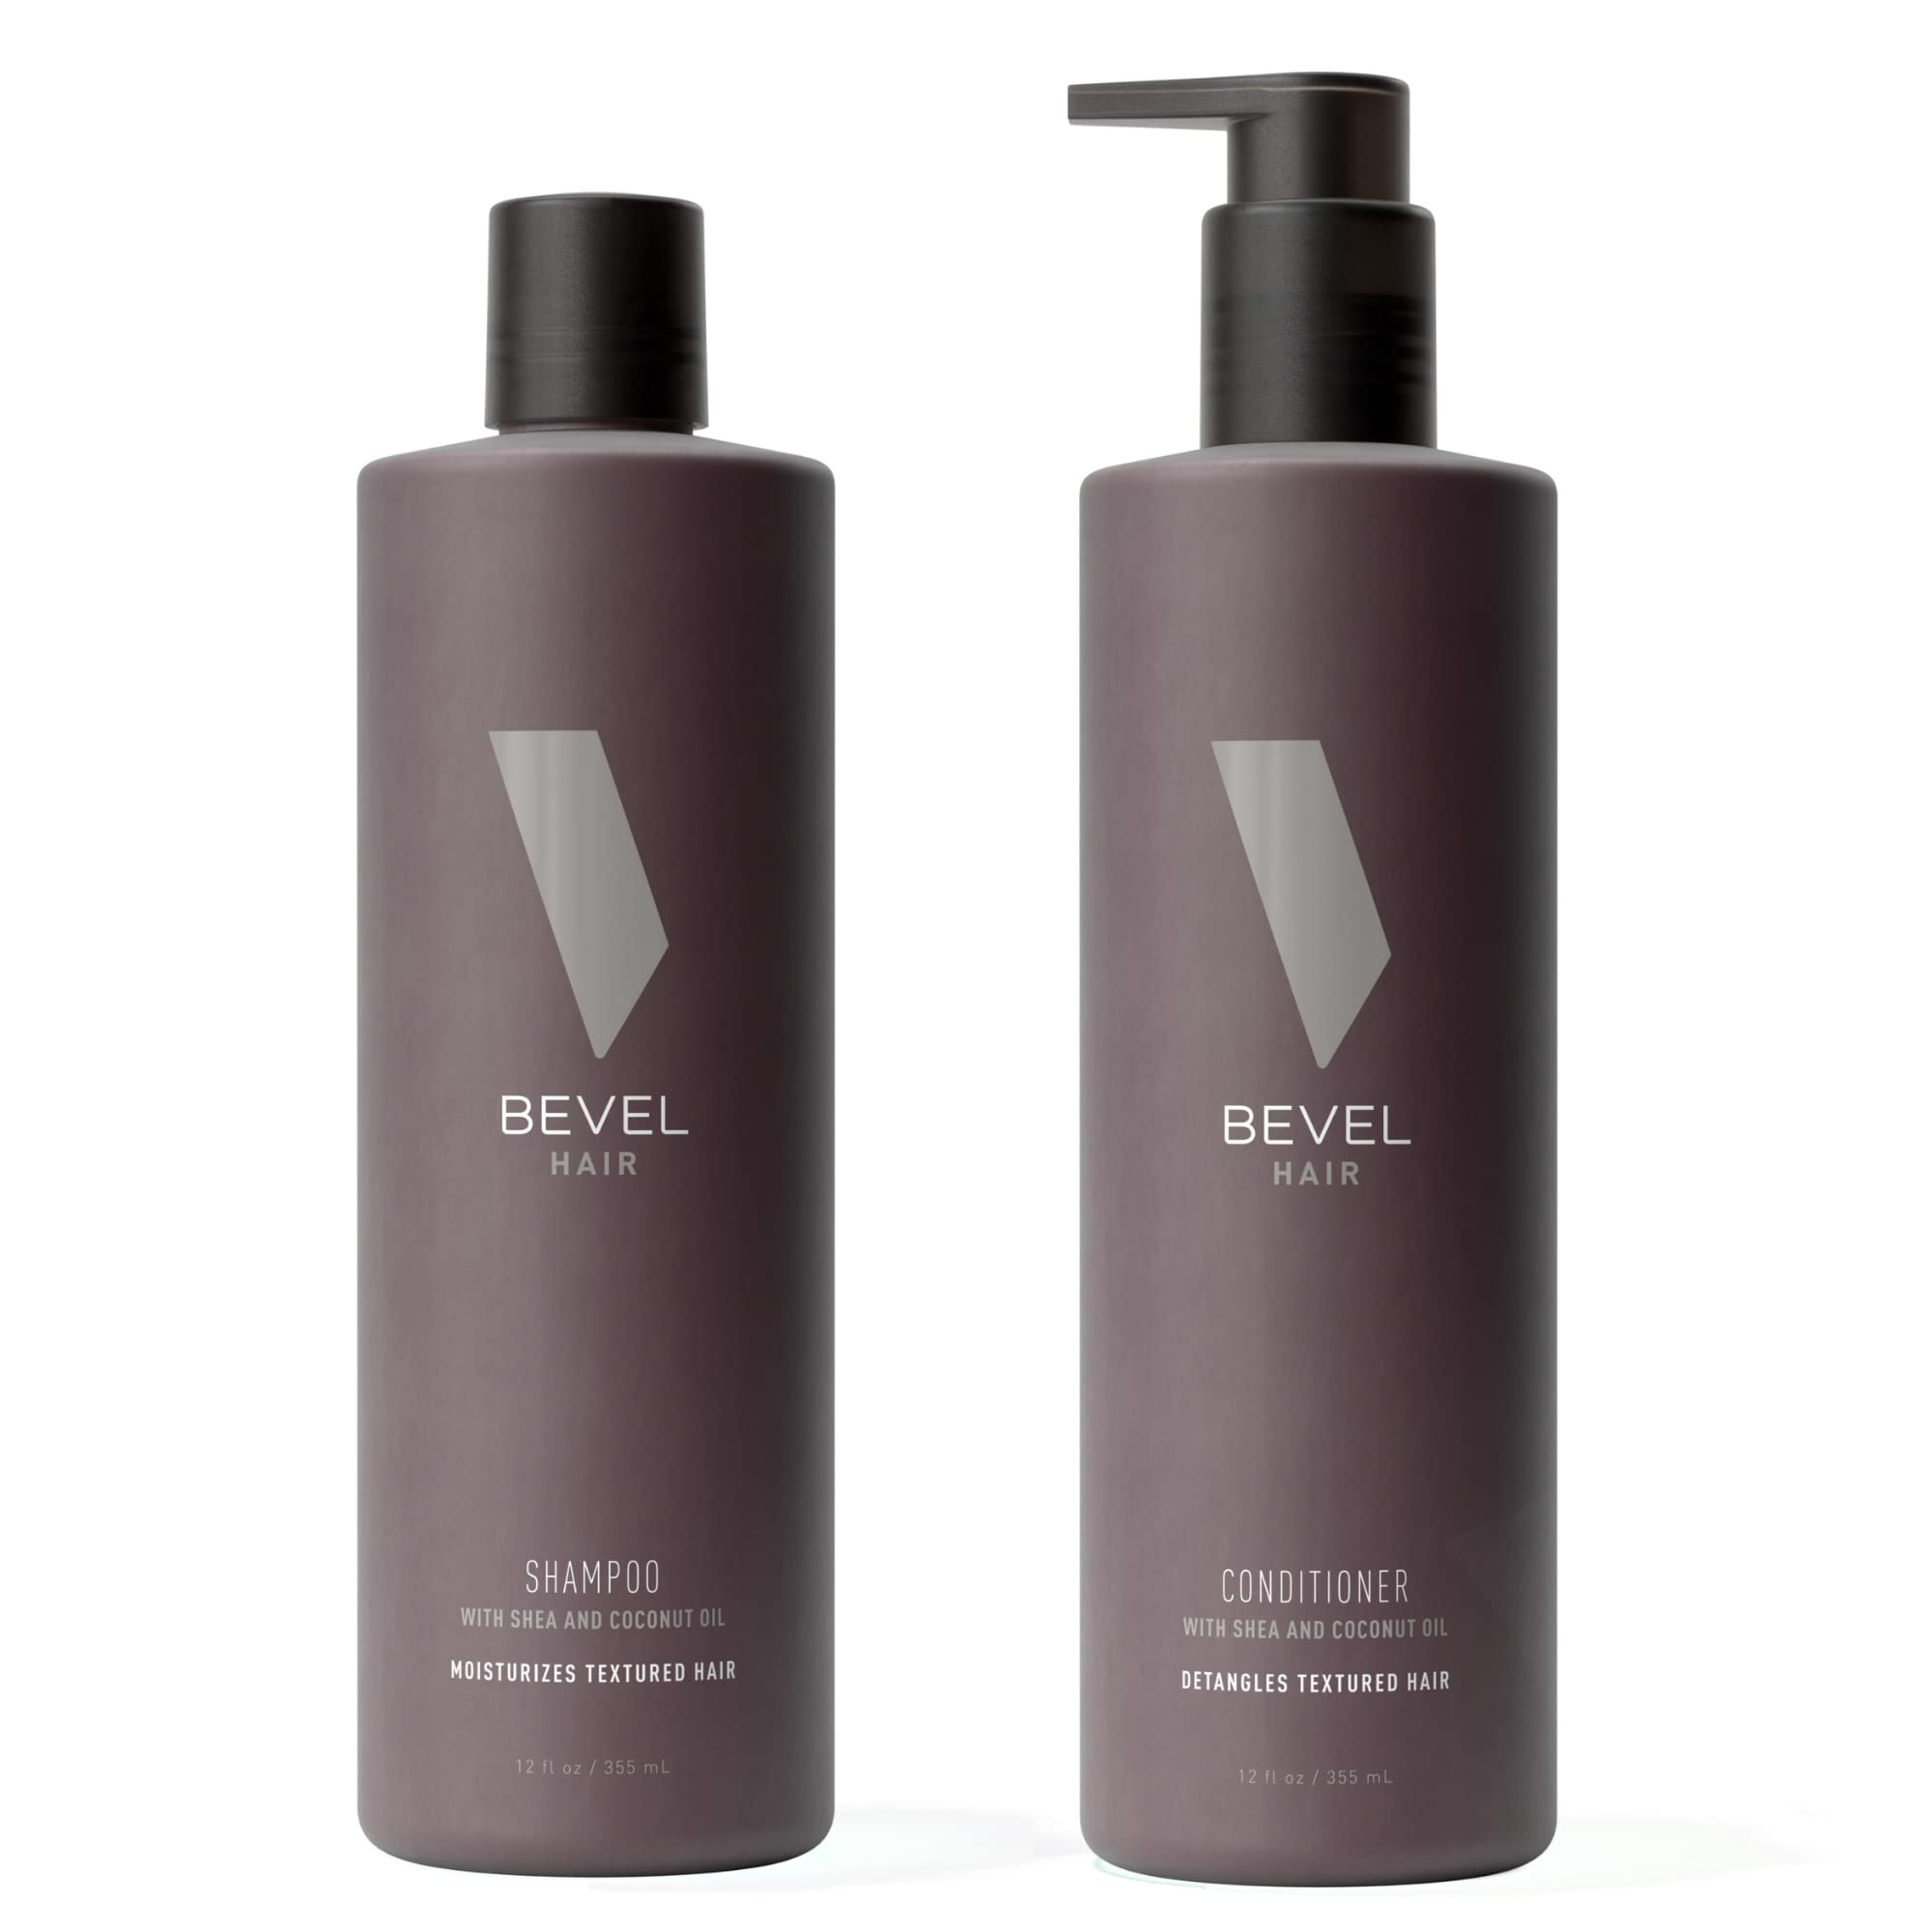 Bevel Shampoo and Conditioner Set for Men - Hair Wash Bundle Pack with Shea Butter and Coconut Oil Moisturizes and Detangles Textured Hair - 12 oz